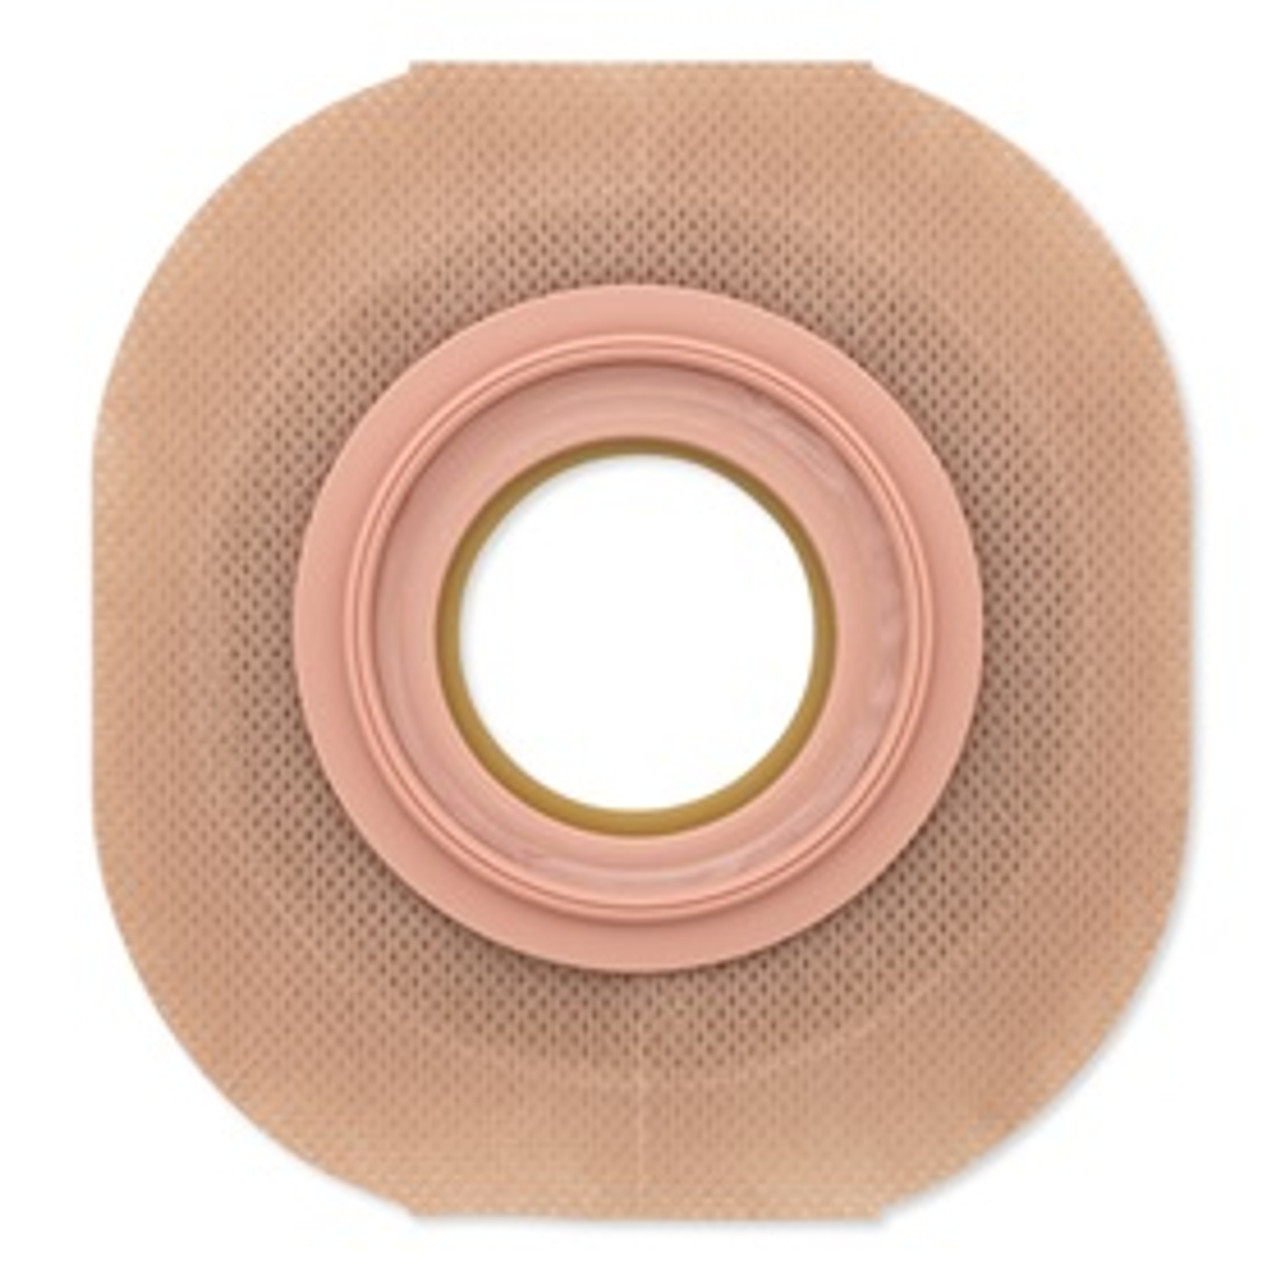 Hollister 13903 BX/5 NEW IMAGE FLEXTEND CONVEX SKIN Barrier WITH TAPERED BORDER, 1 3/4" (44MM) FLANGE, PRE-CUT 7/8" (22MM)